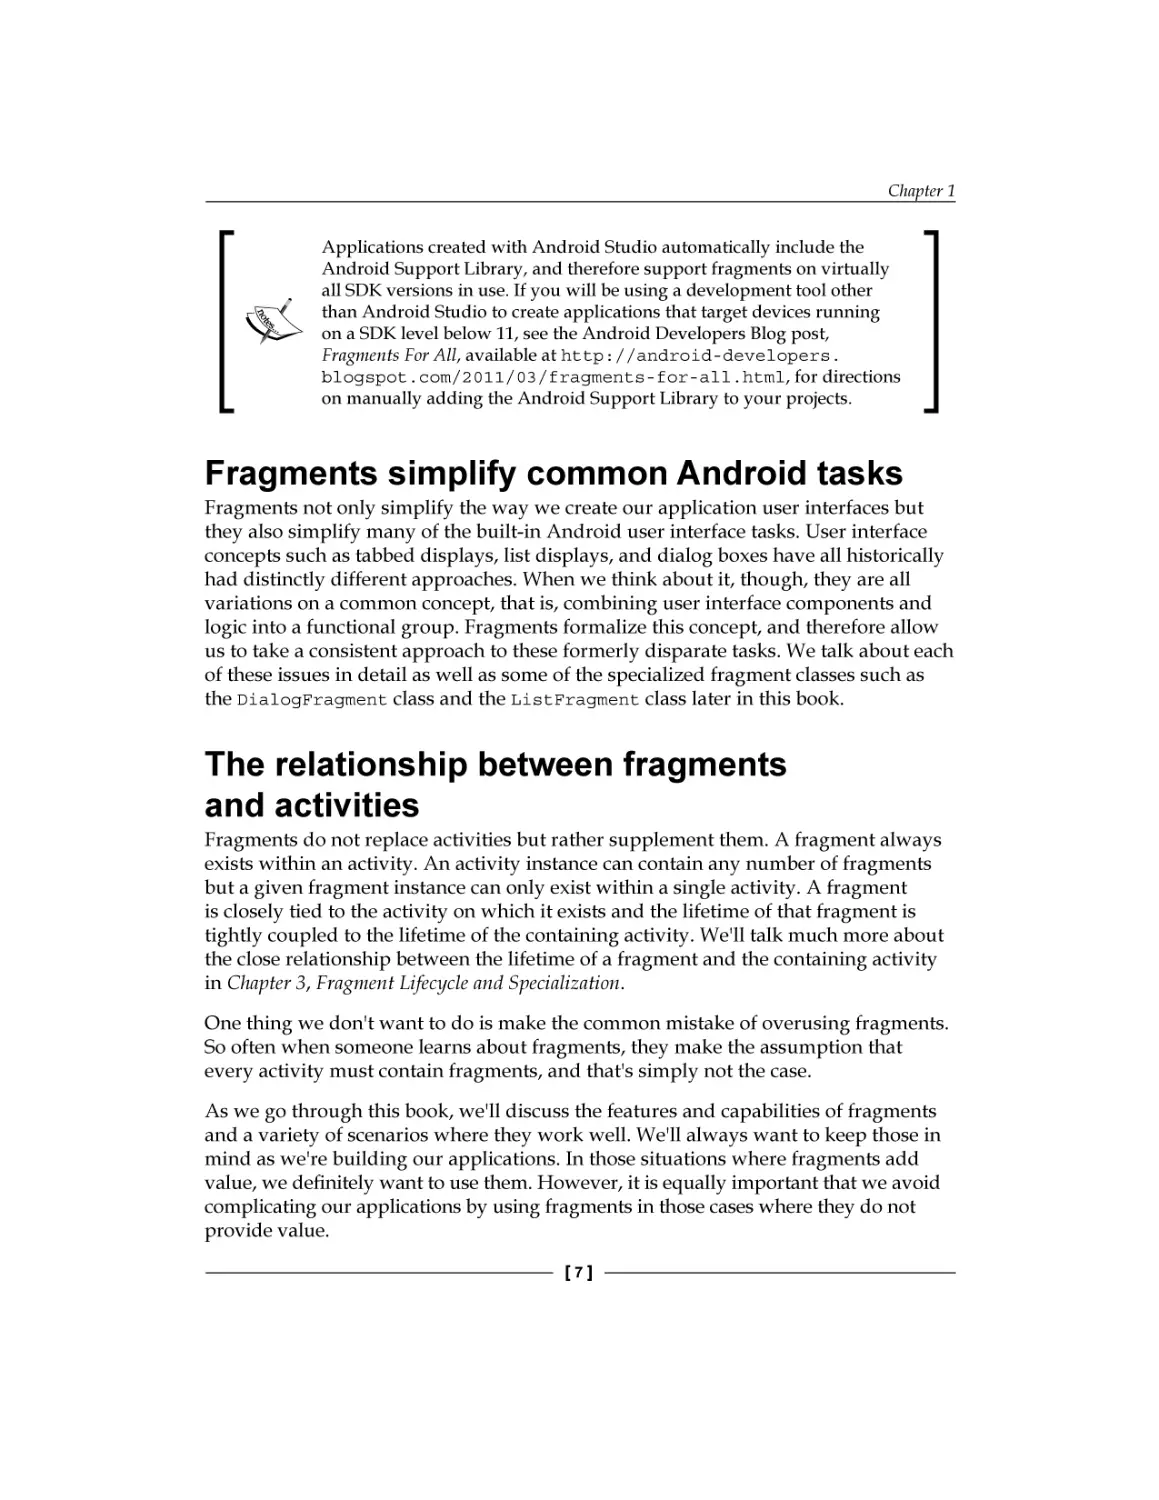 Fragments simplify common Android tasks
The relationship between fragments